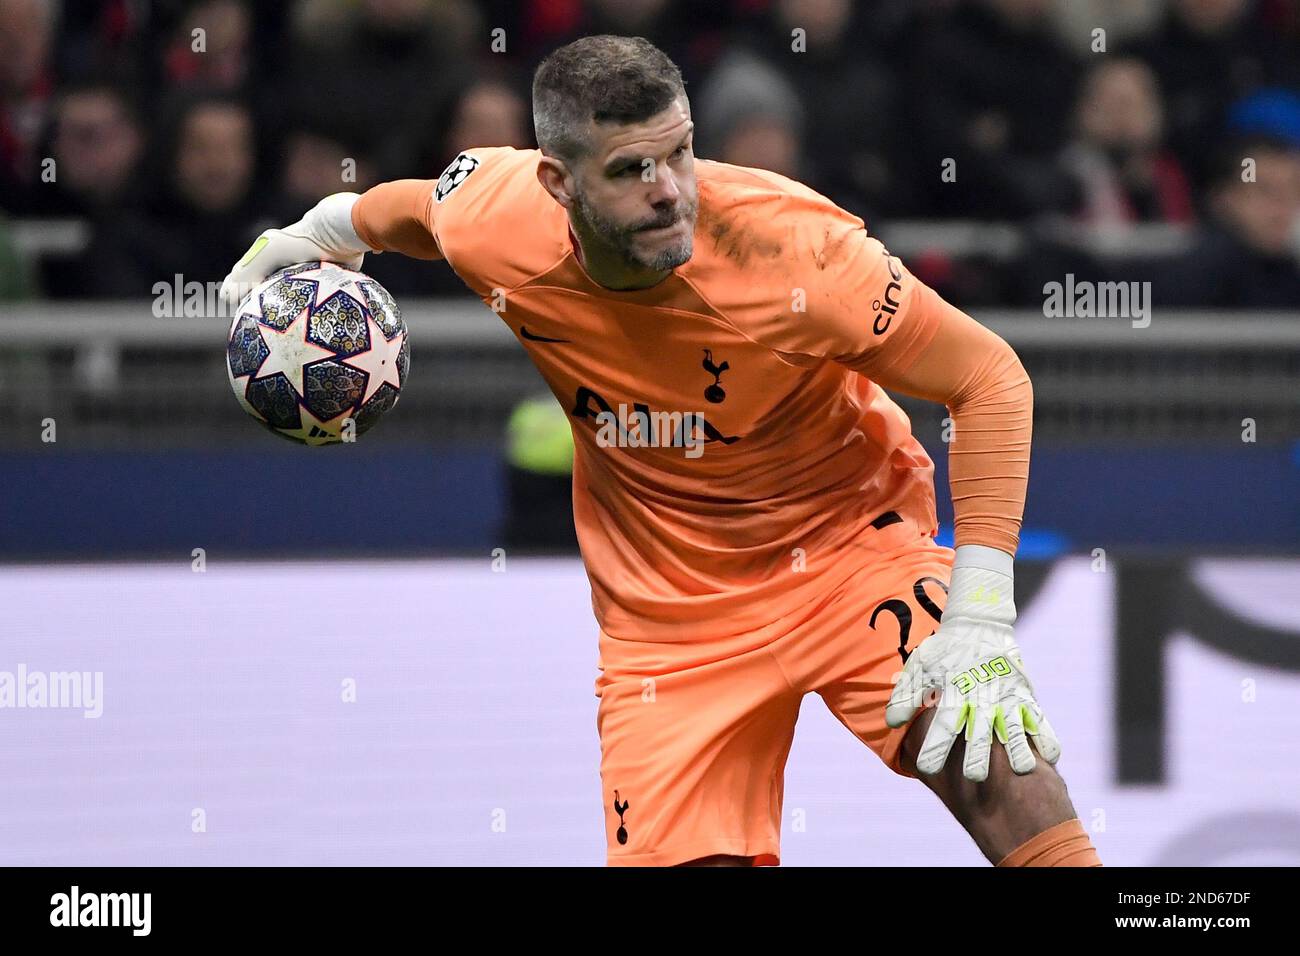 Fraser Forster of Tottenham Hotspur in action during the Uefa Champions League football match between AC Milan and Tottenham Hotspur at San Siro stadi Stock Photo